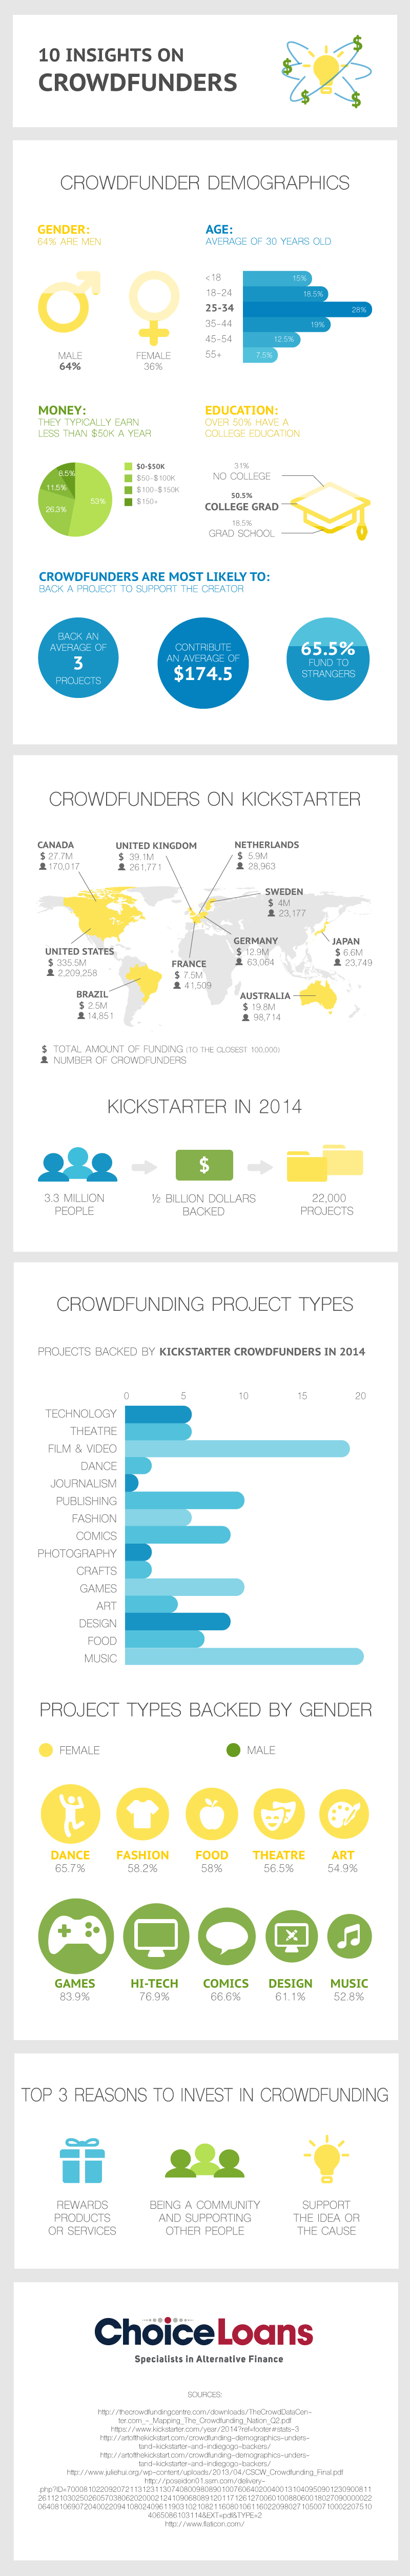 10 Insights on Crowdfunders